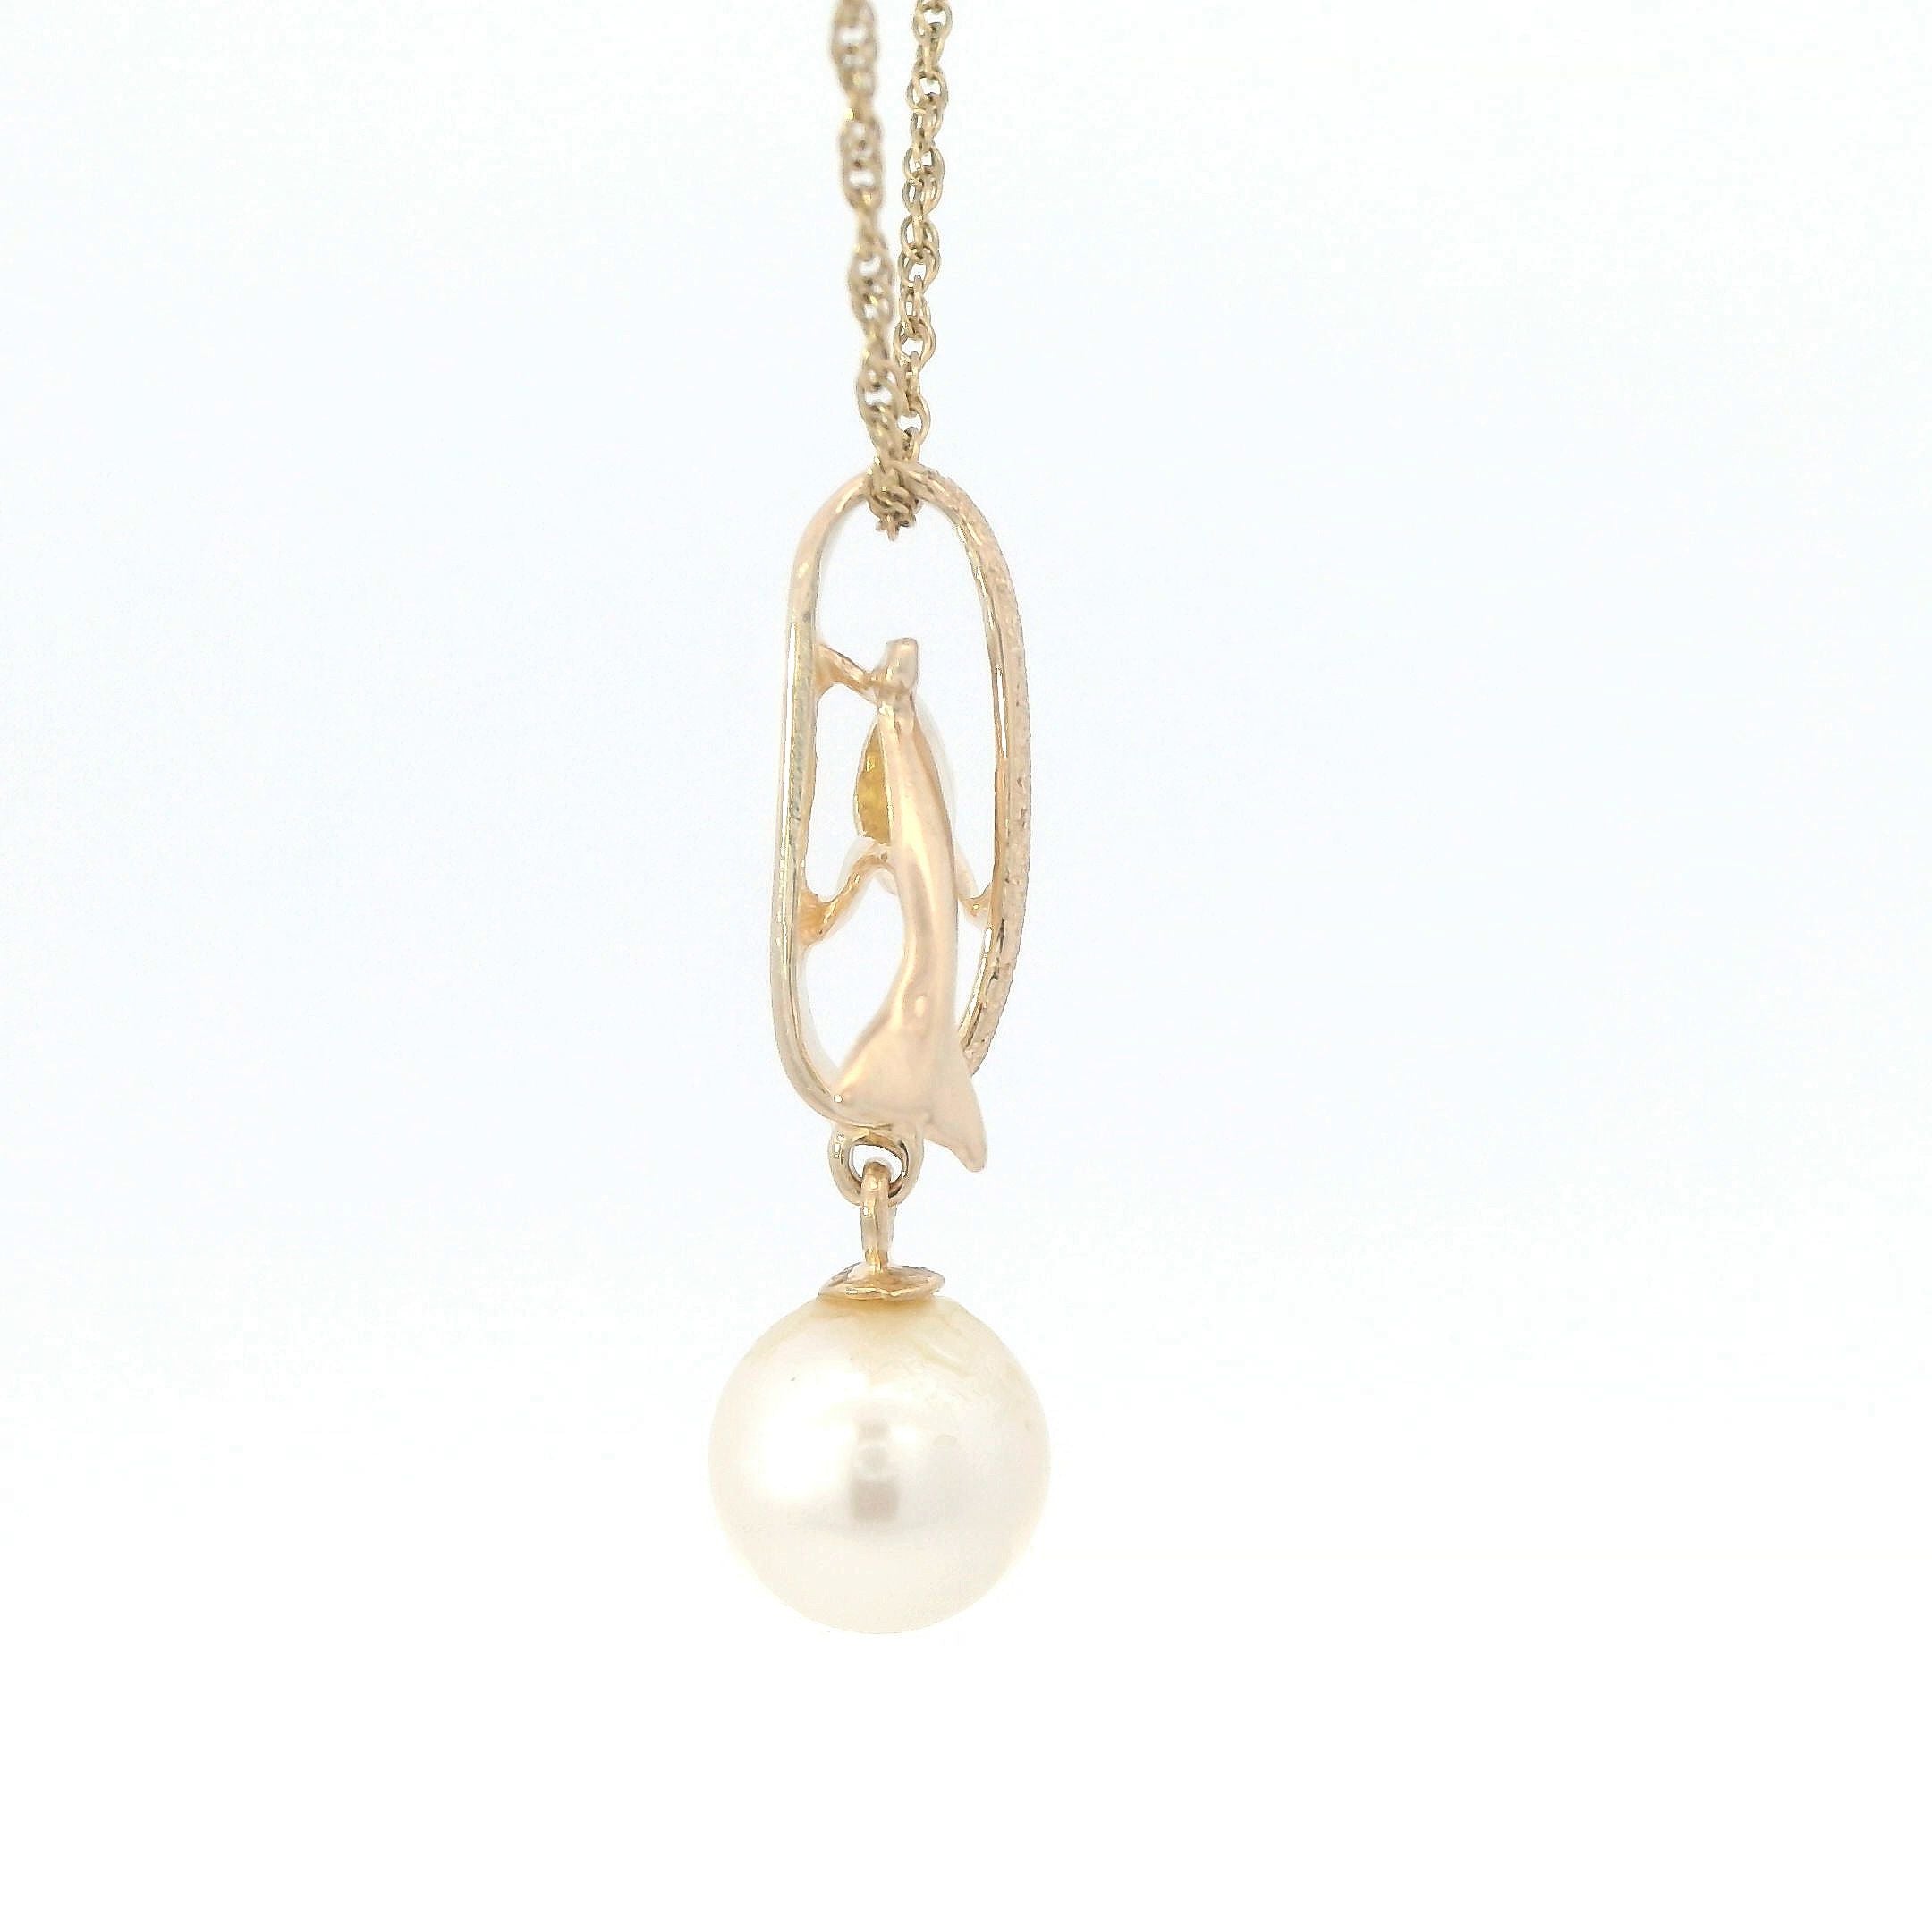 Estate Collection: 14K Yellow Gold Leaping Dolphin & Pearl Pendant Necklace